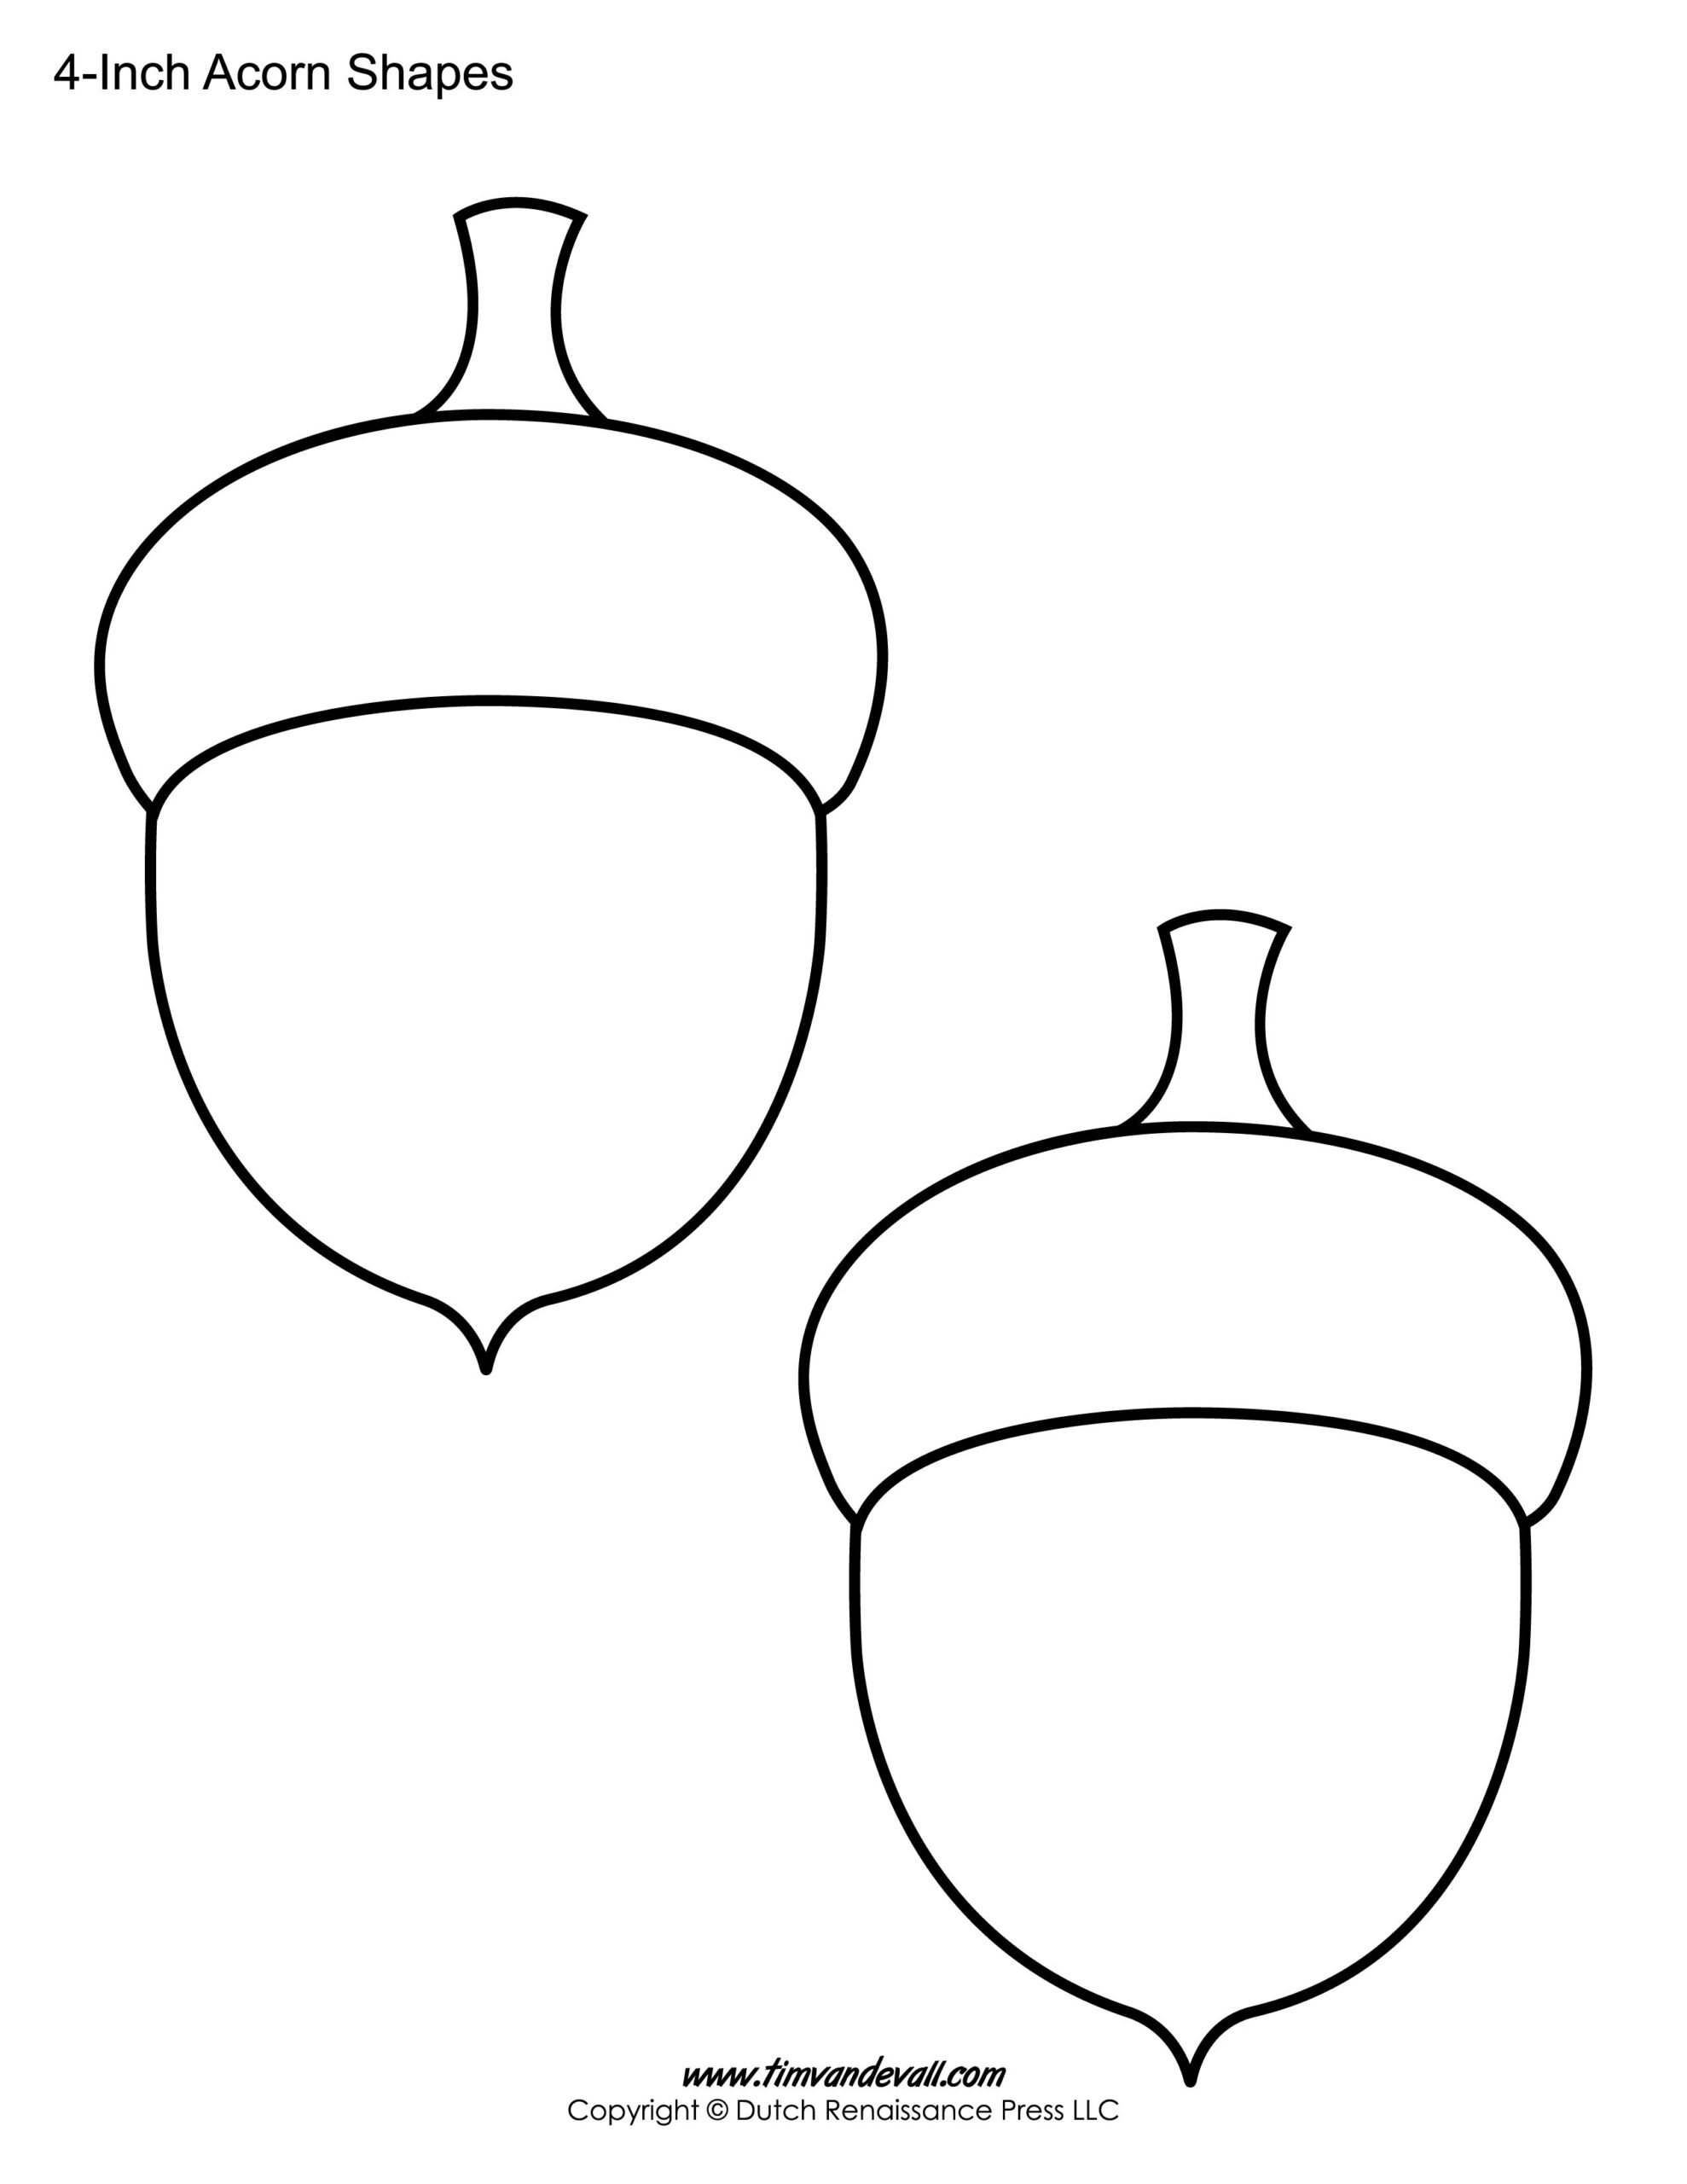 Free Acorn Templates For Crafts